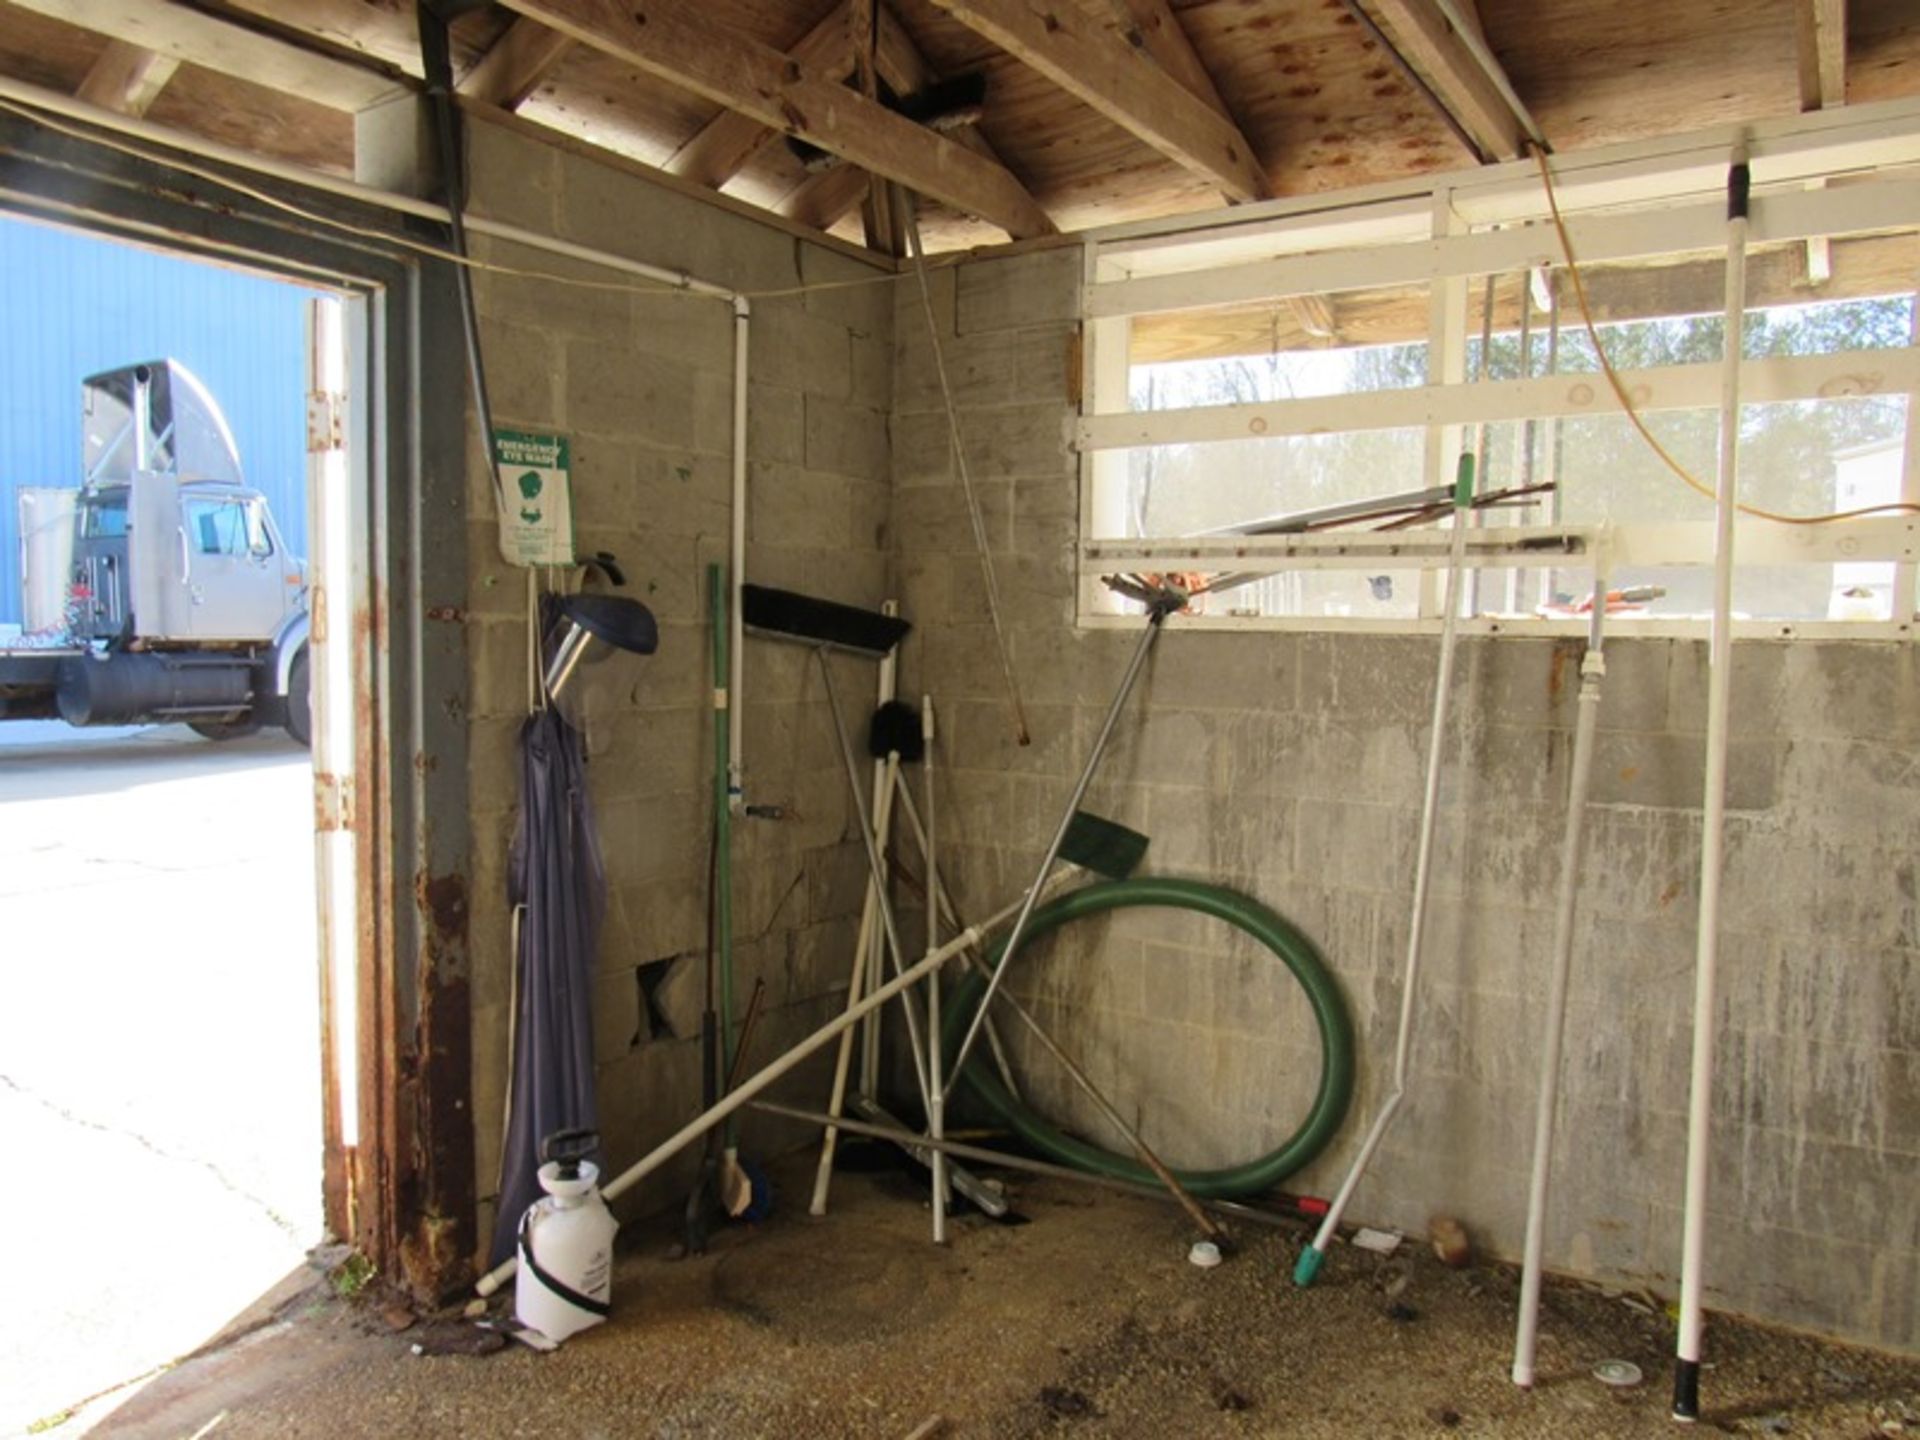 Lot Compressor Room Contents: Desk, Chairs, Hose, Sprayers, Bump Caps, Boots, Stainless Steel - Image 10 of 10